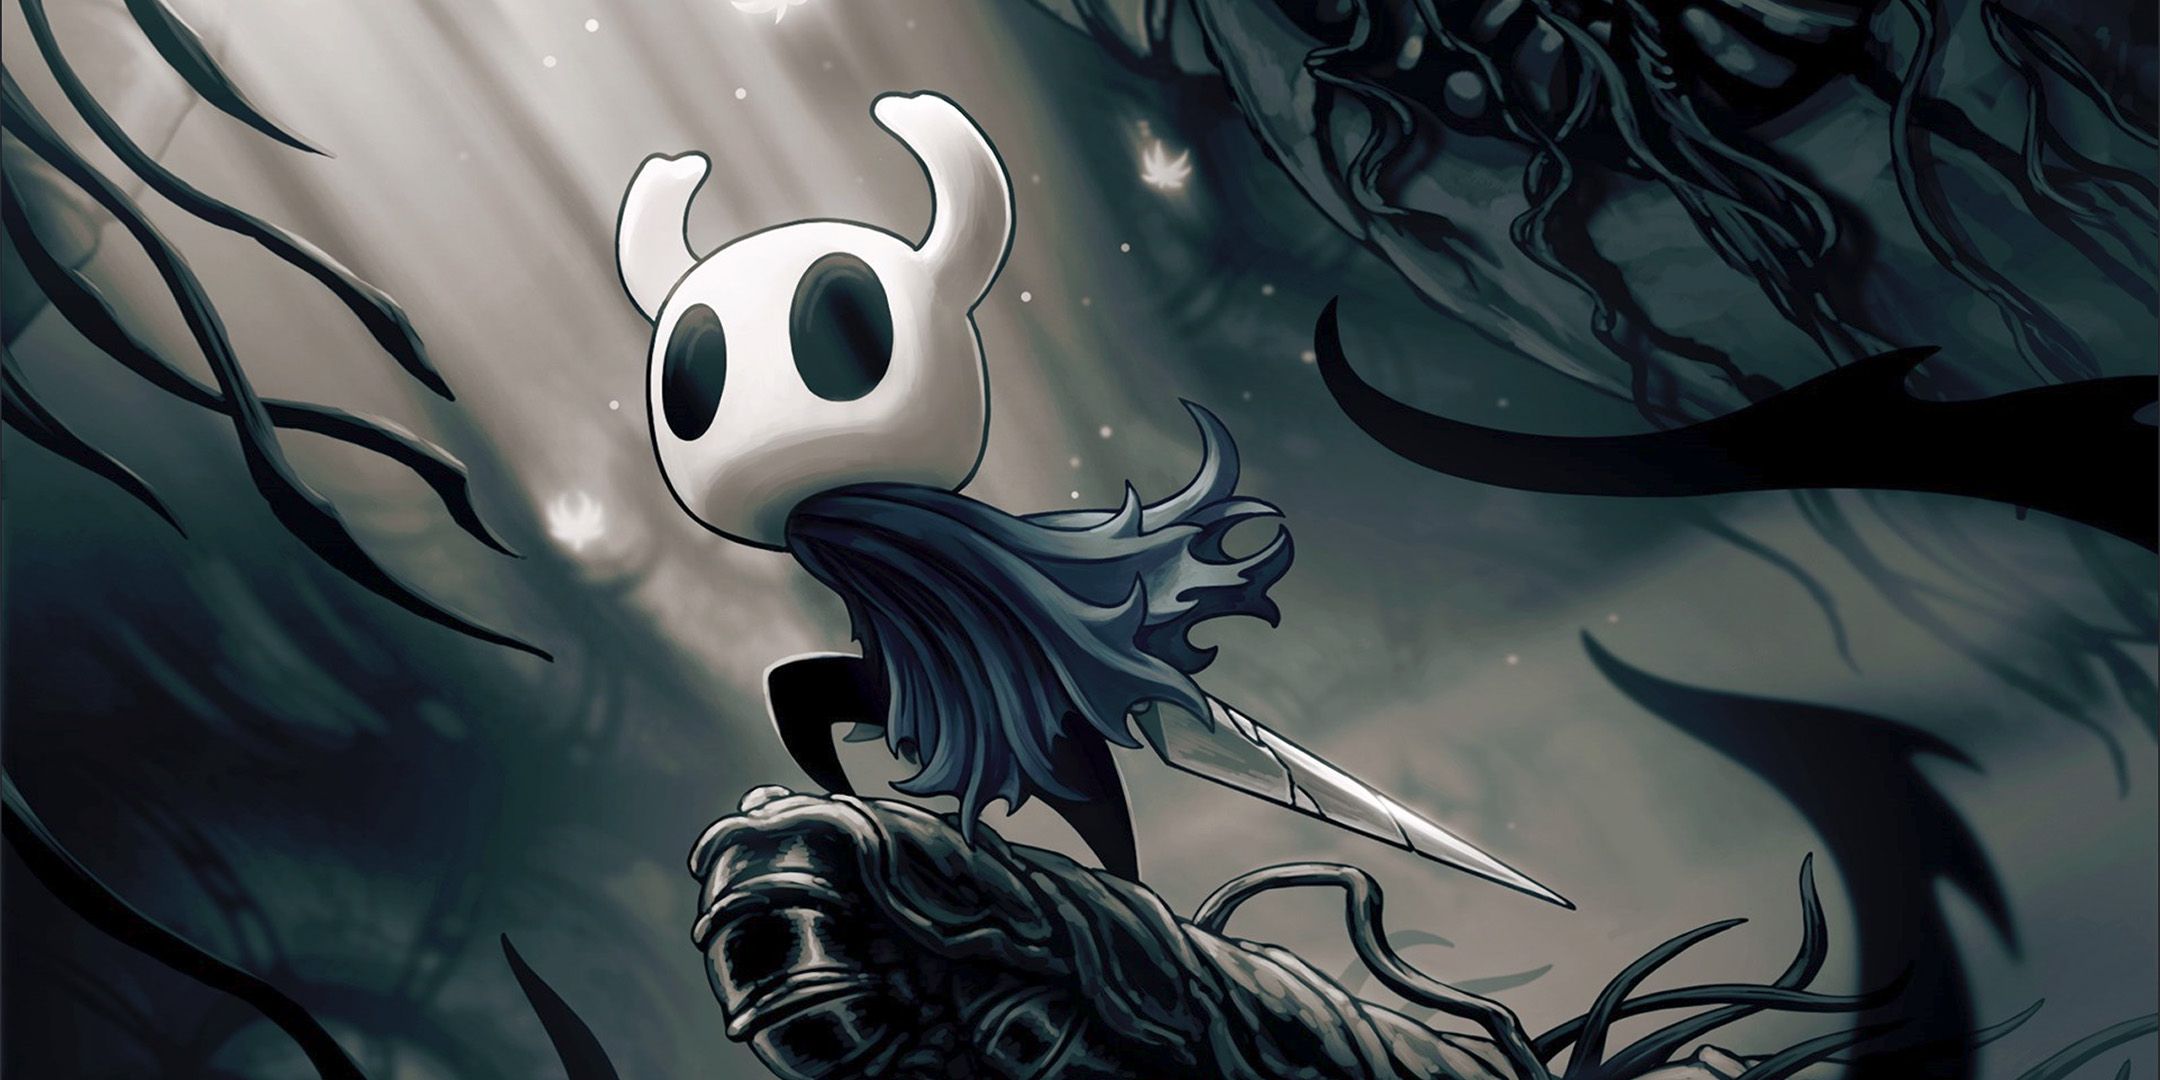 The knight from Hollow Knight